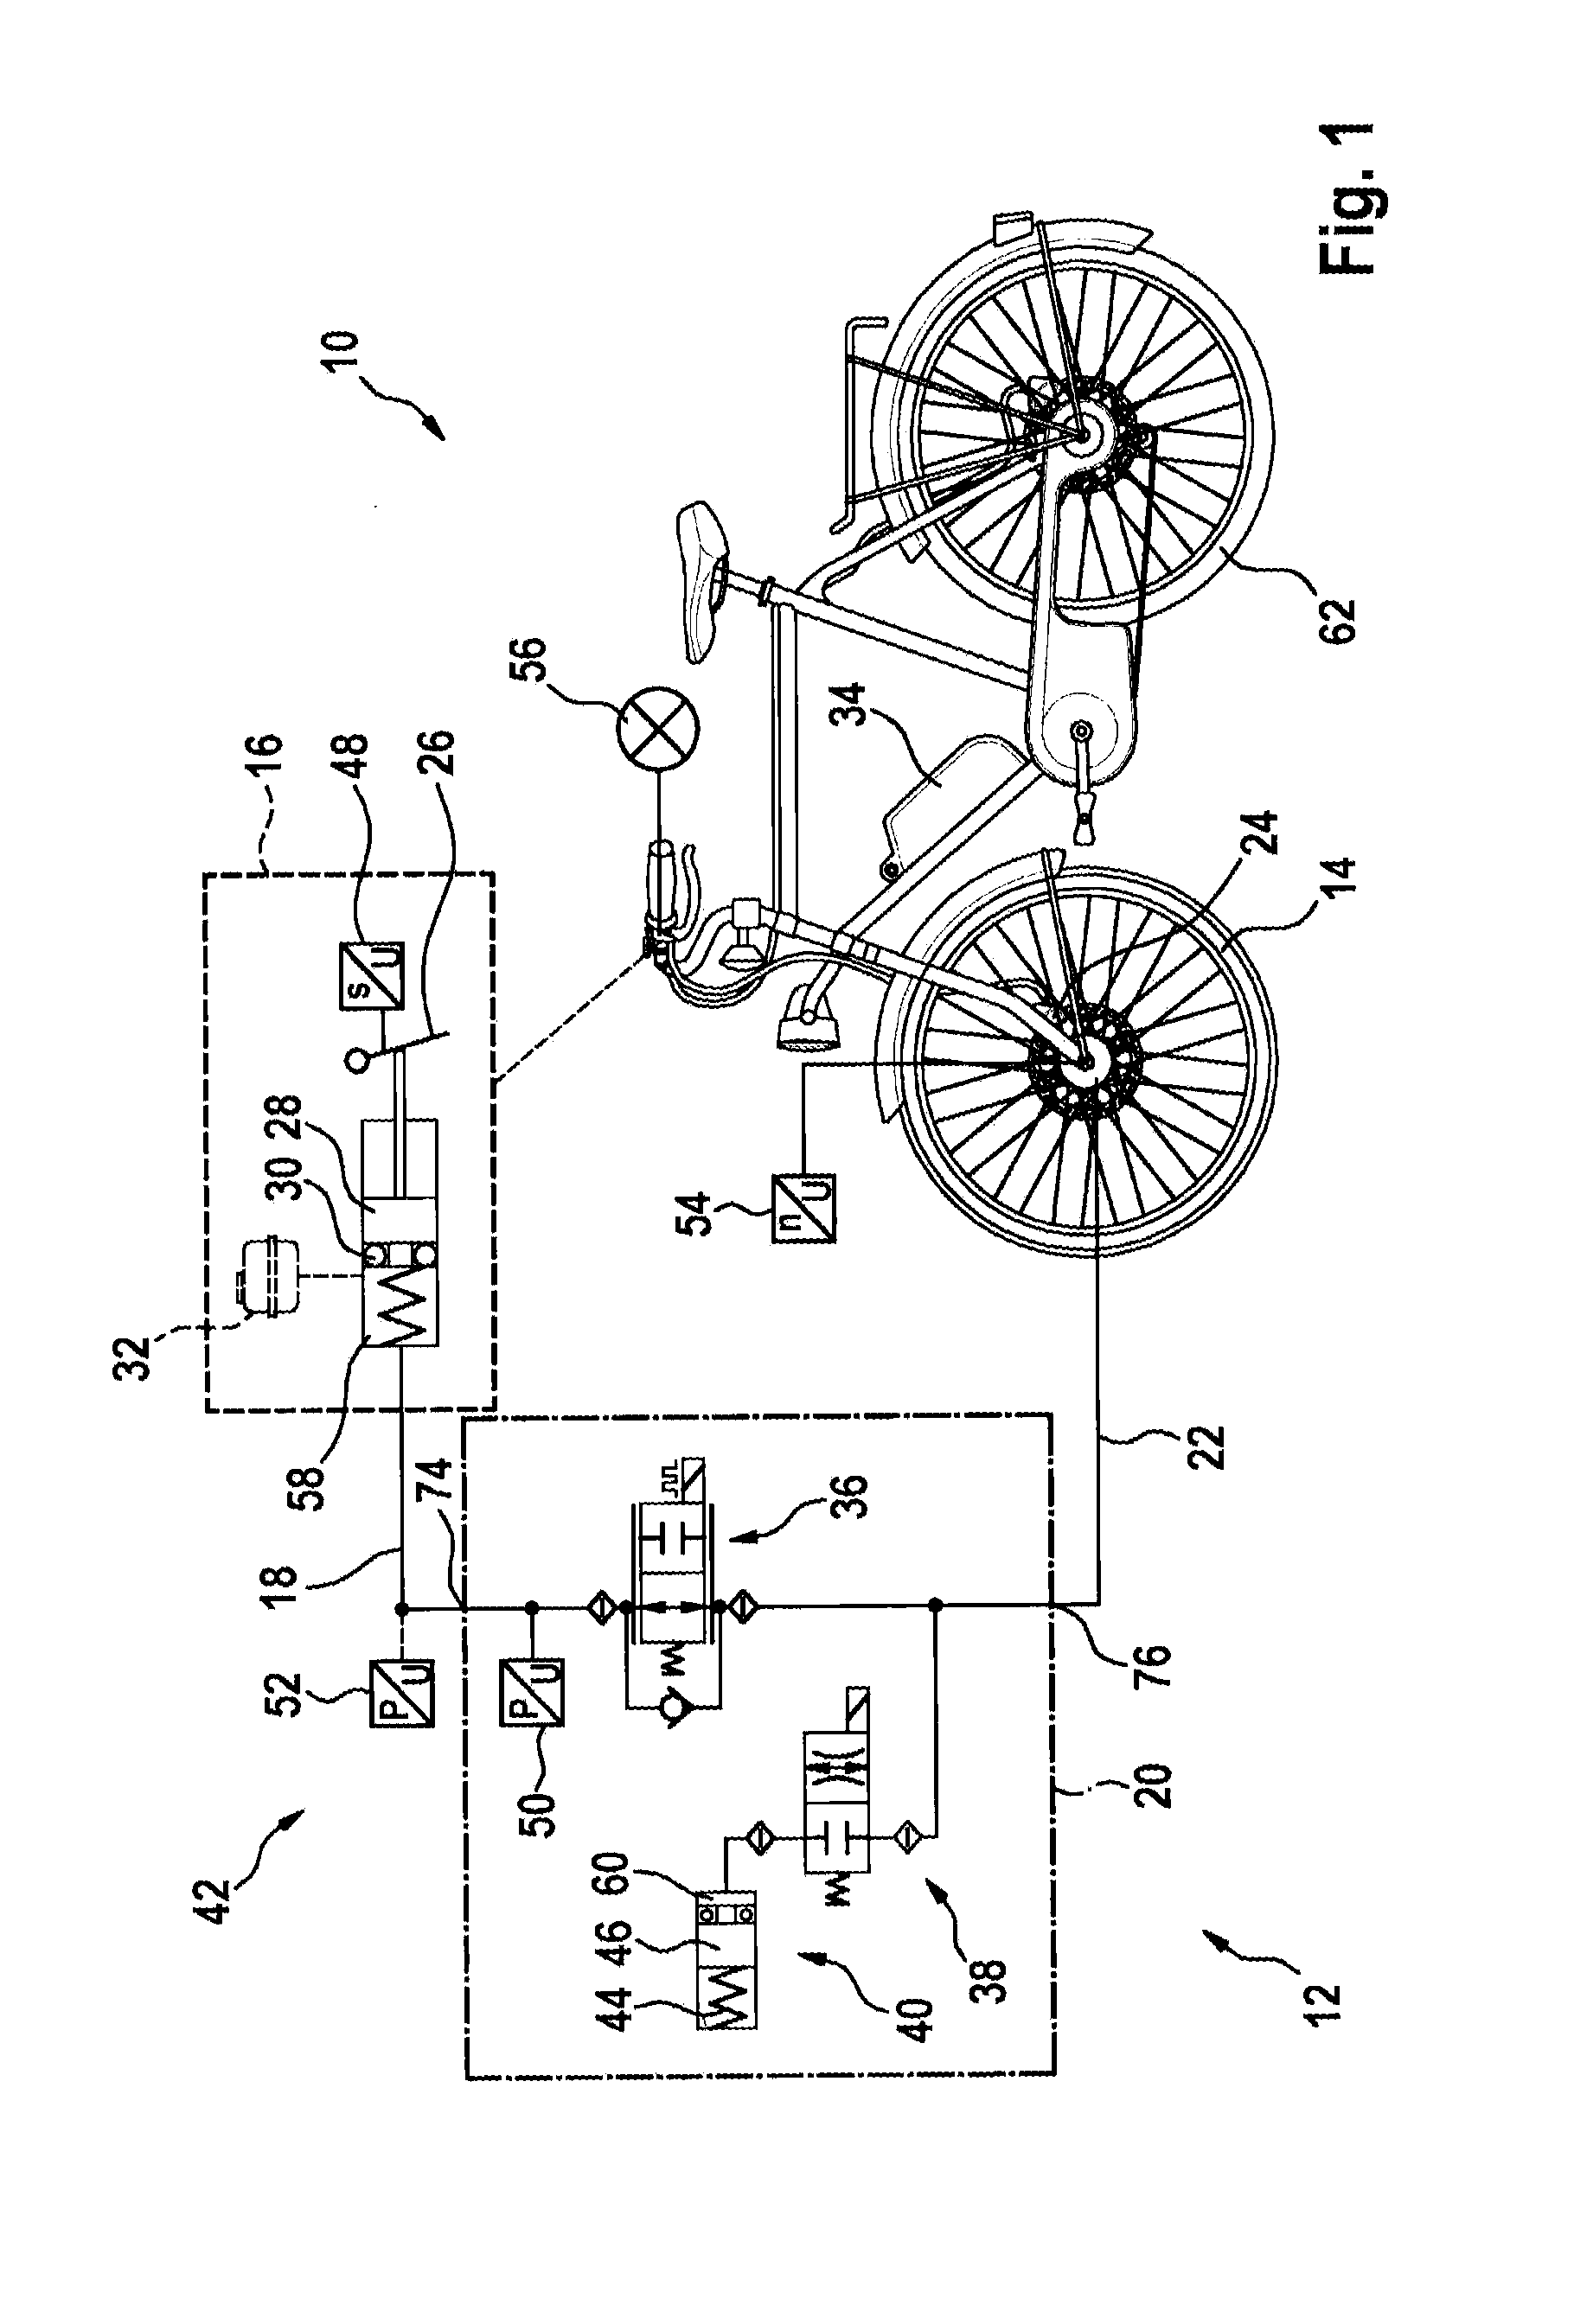 Hydraulic module for an antilock braking system for a two-wheeled vehicle